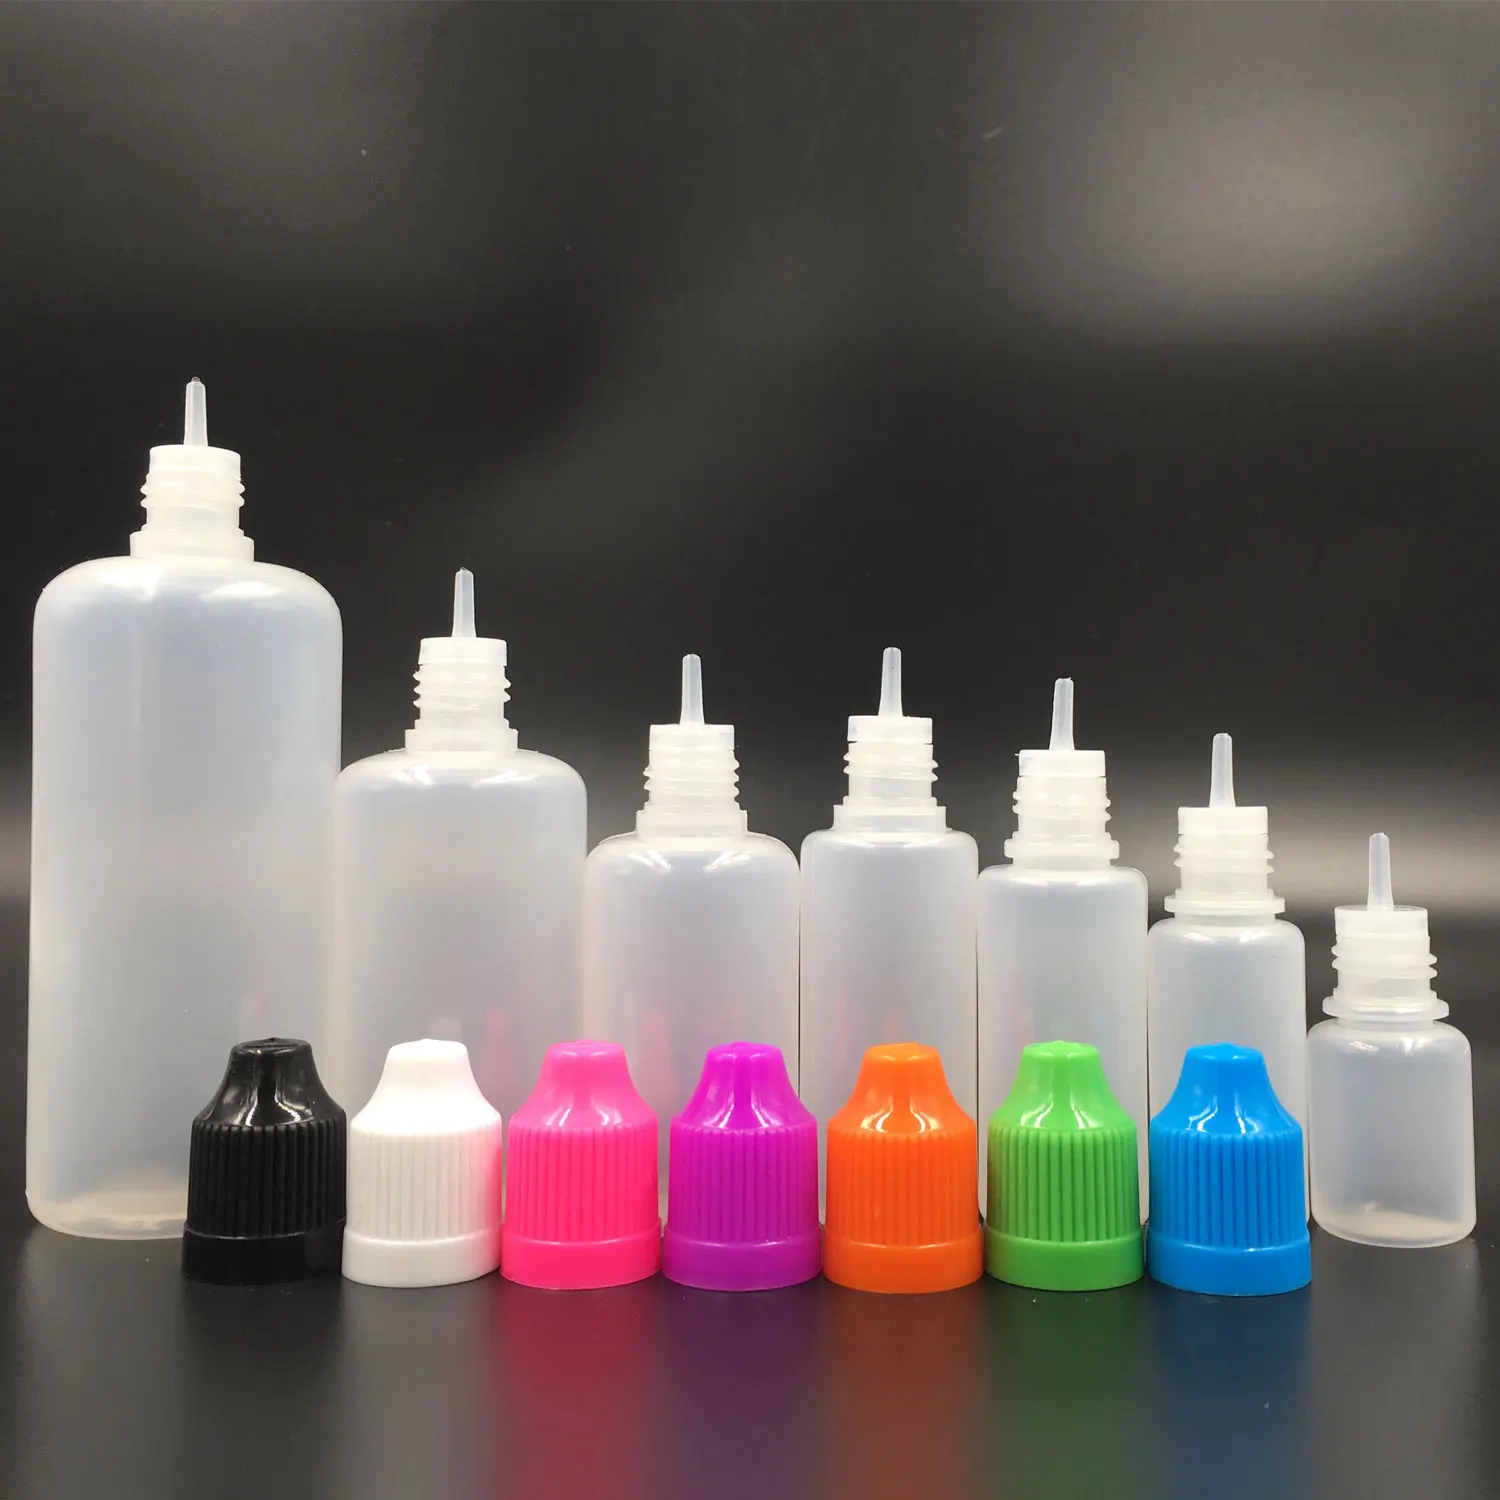 10pcs 5ml-120ml Empty Soft LDPE Dropper Bottles Plastic Containers for E Liquid Vape Bottle with Mixed Caps Lid Plugs mofii candy keyboard mouse combo wireless 2 4g mixed color 84 key mini keyboard mouse set with circular punk key caps green